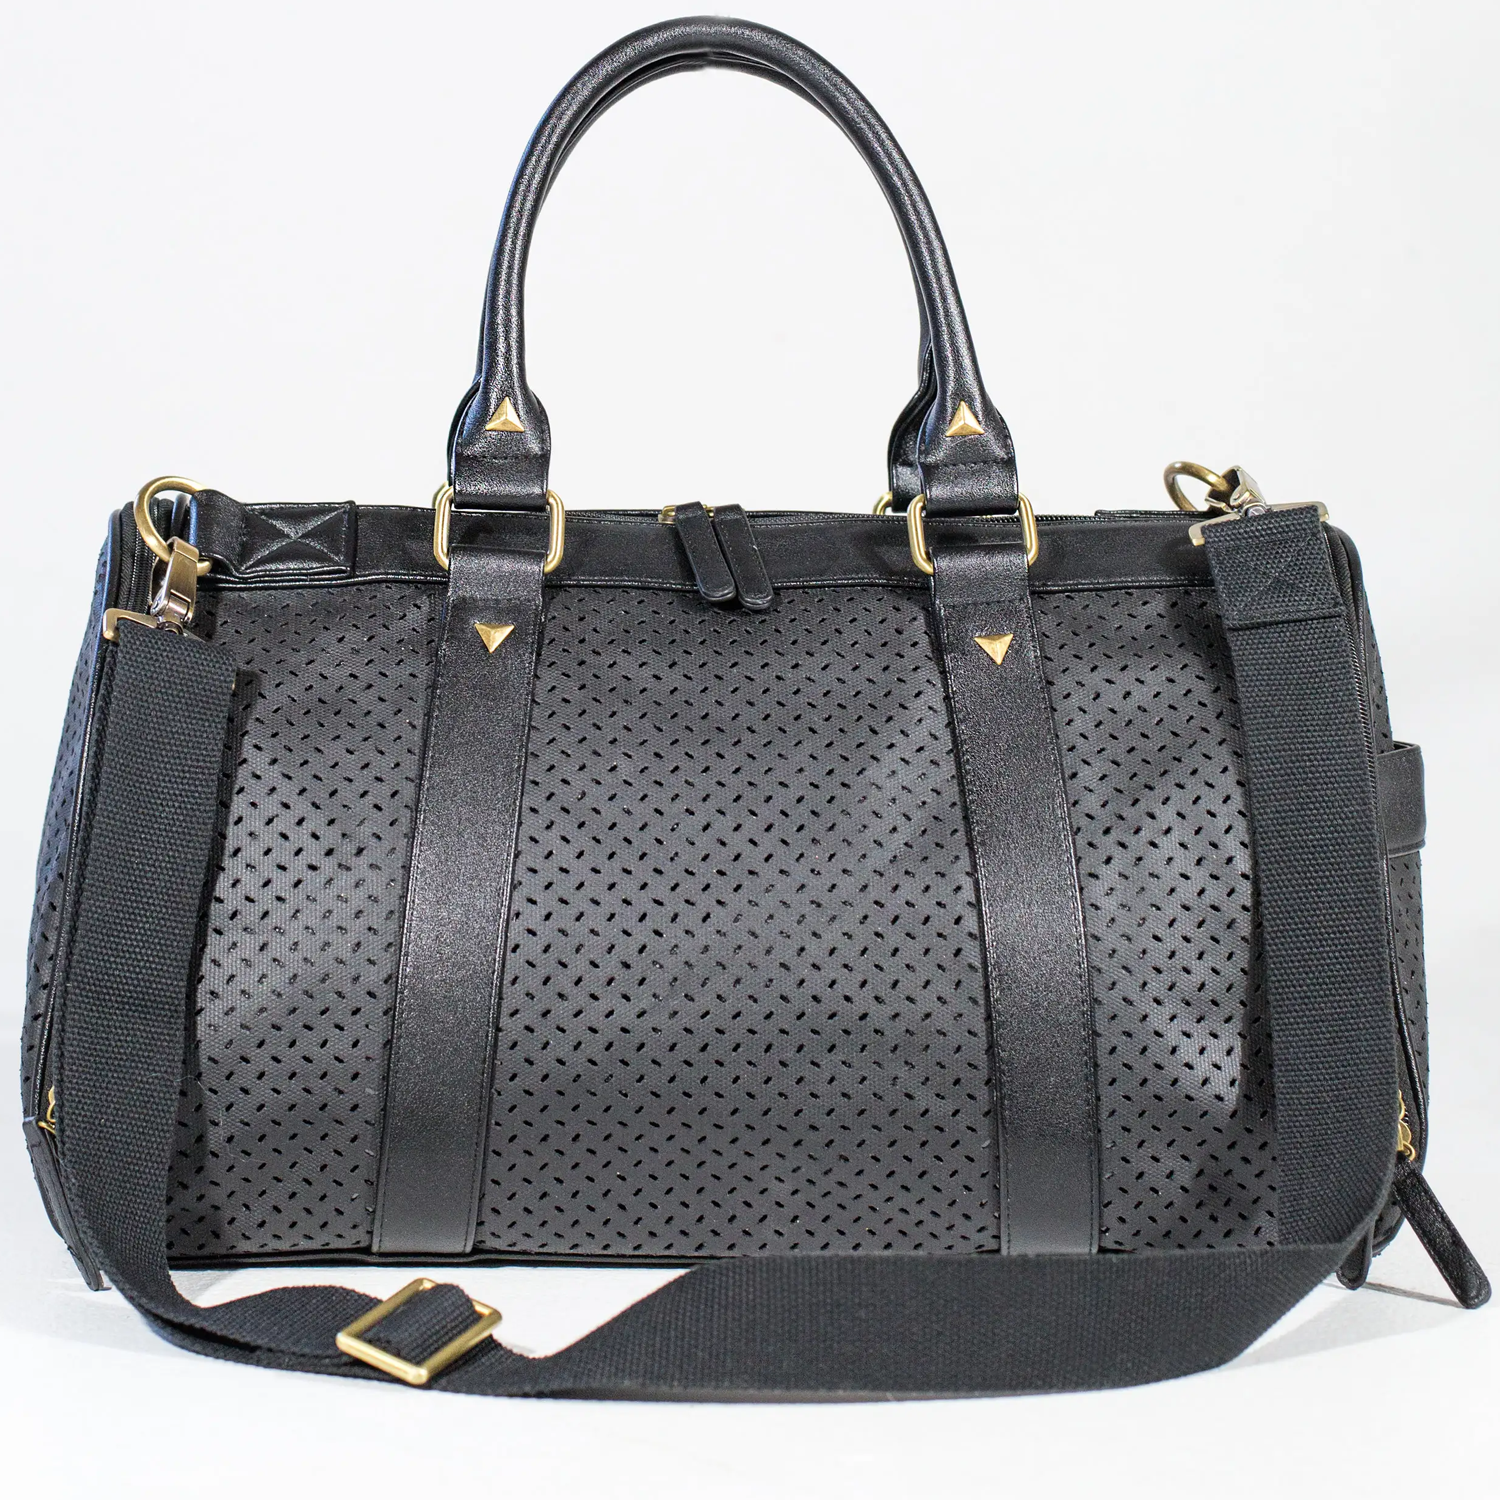 Pet Carrier - Midnight Mia Dog Carrier by BK Atelier